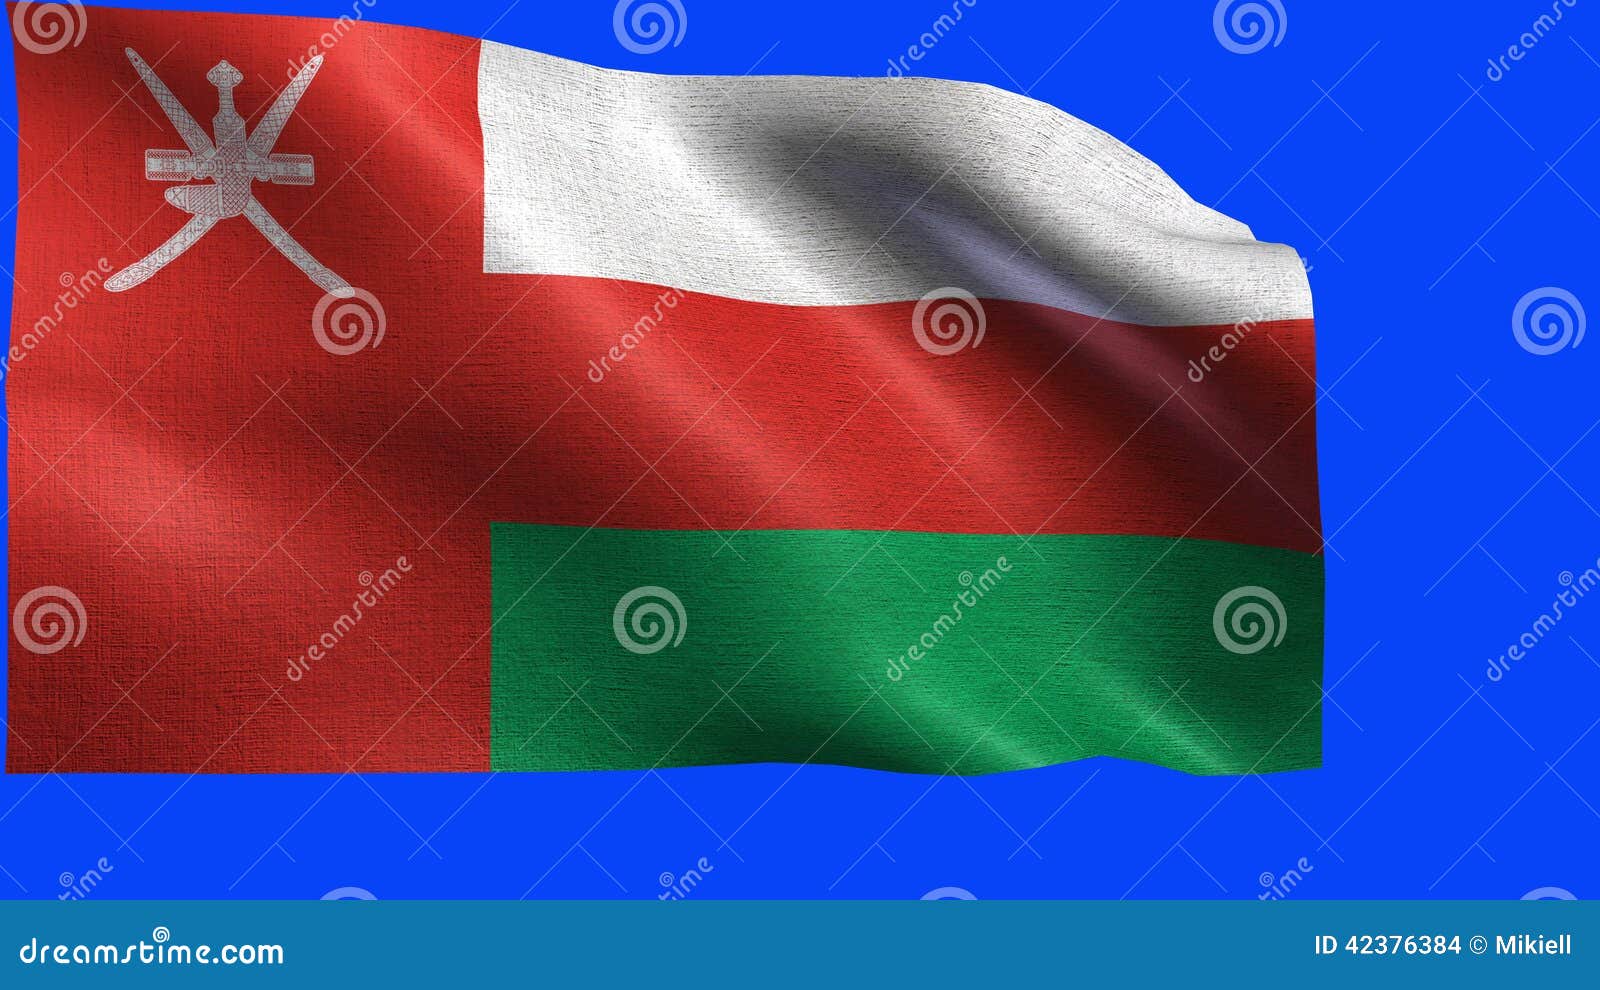 Sultanate of Oman, Flag of Oman - LOOP Stock Footage - Video of motion,  channel: 42376384